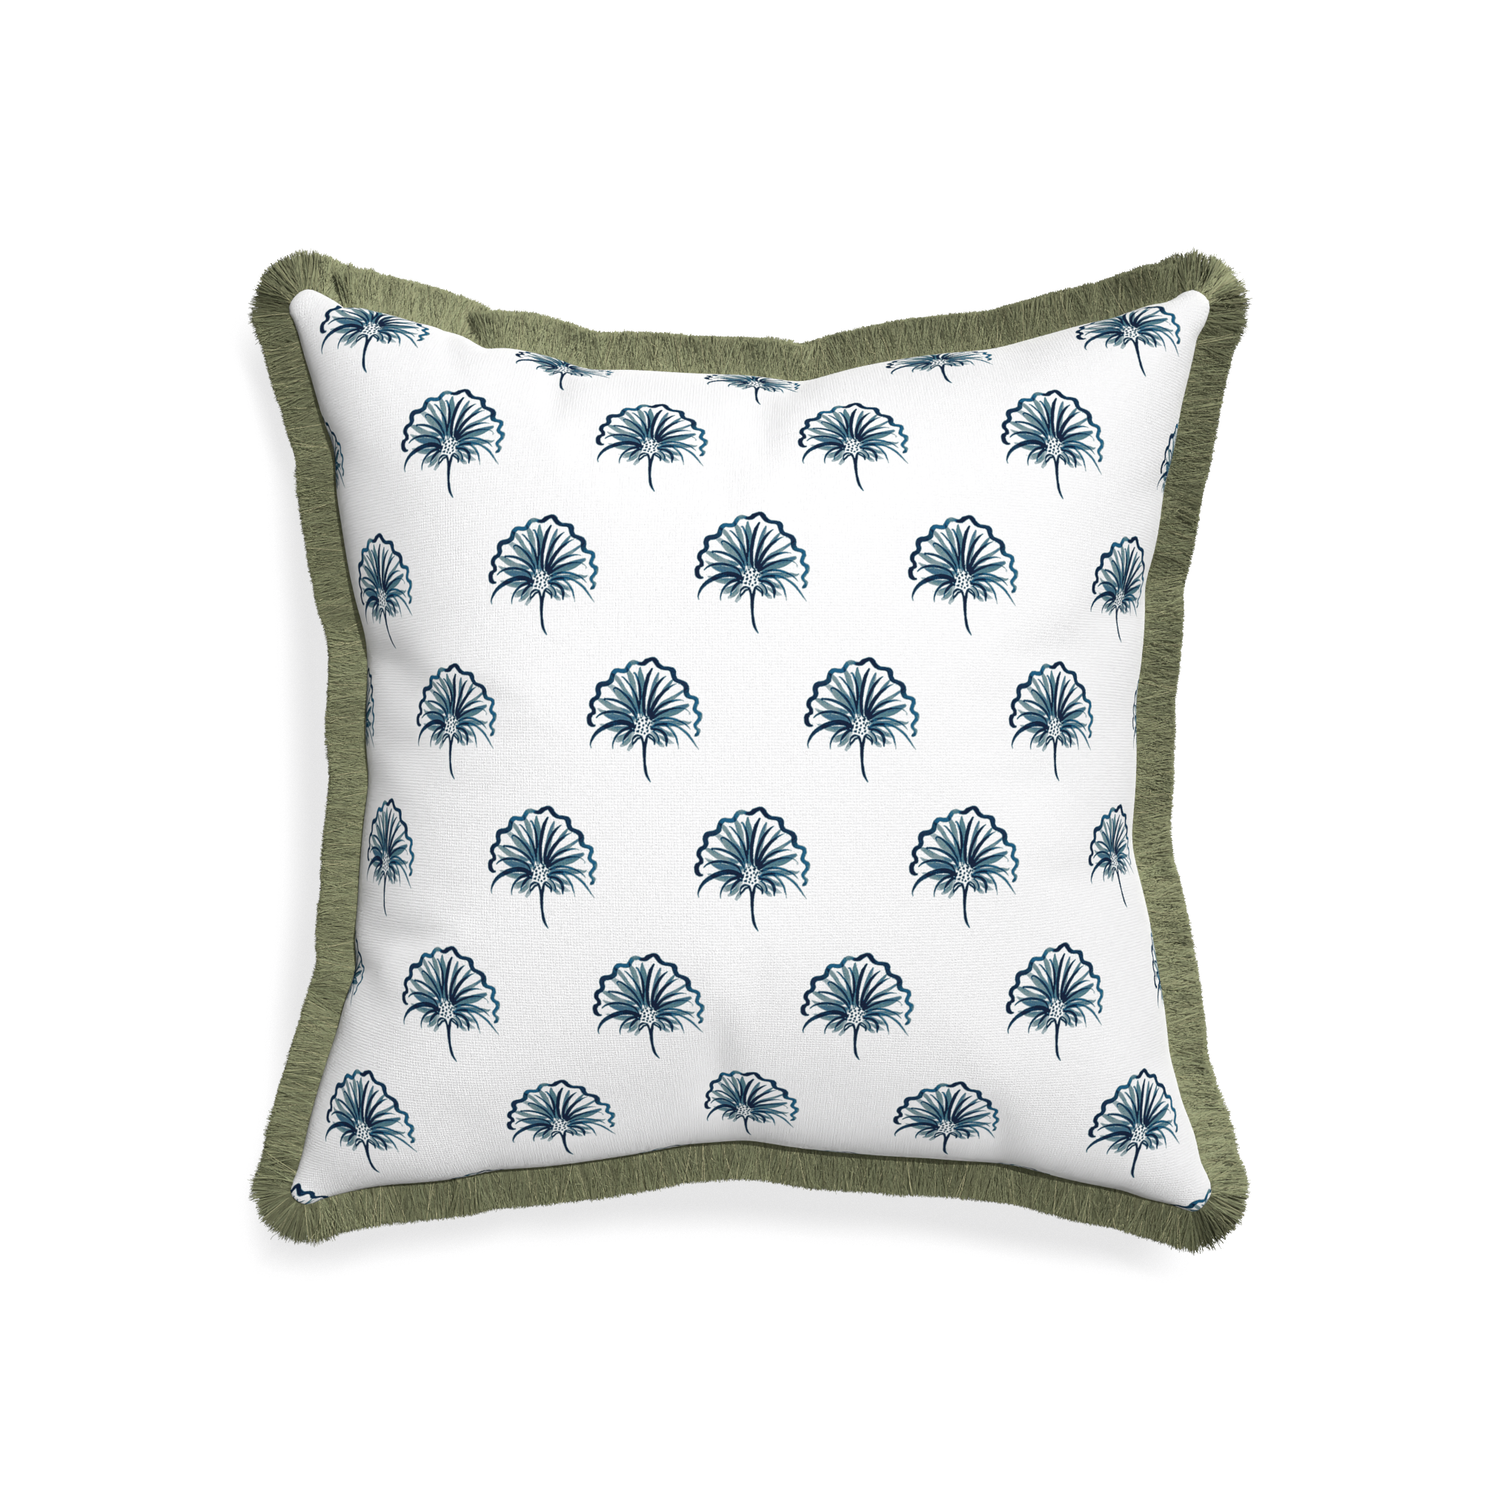 20-square penelope midnight custom floral navypillow with sage fringe on white background